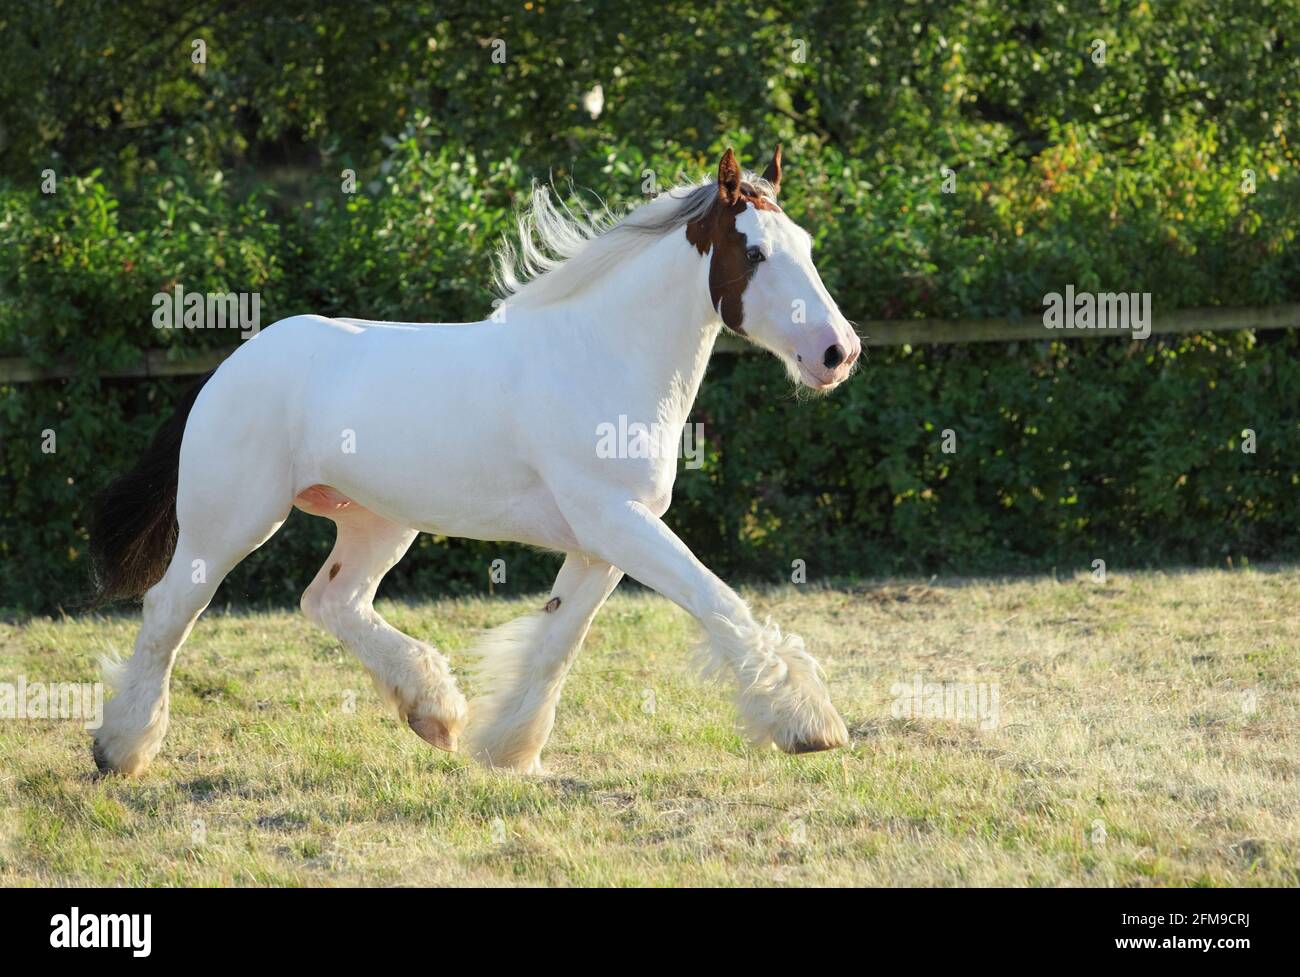 American Paint Horse stallion galloping in paddock at dusk Stock Photo